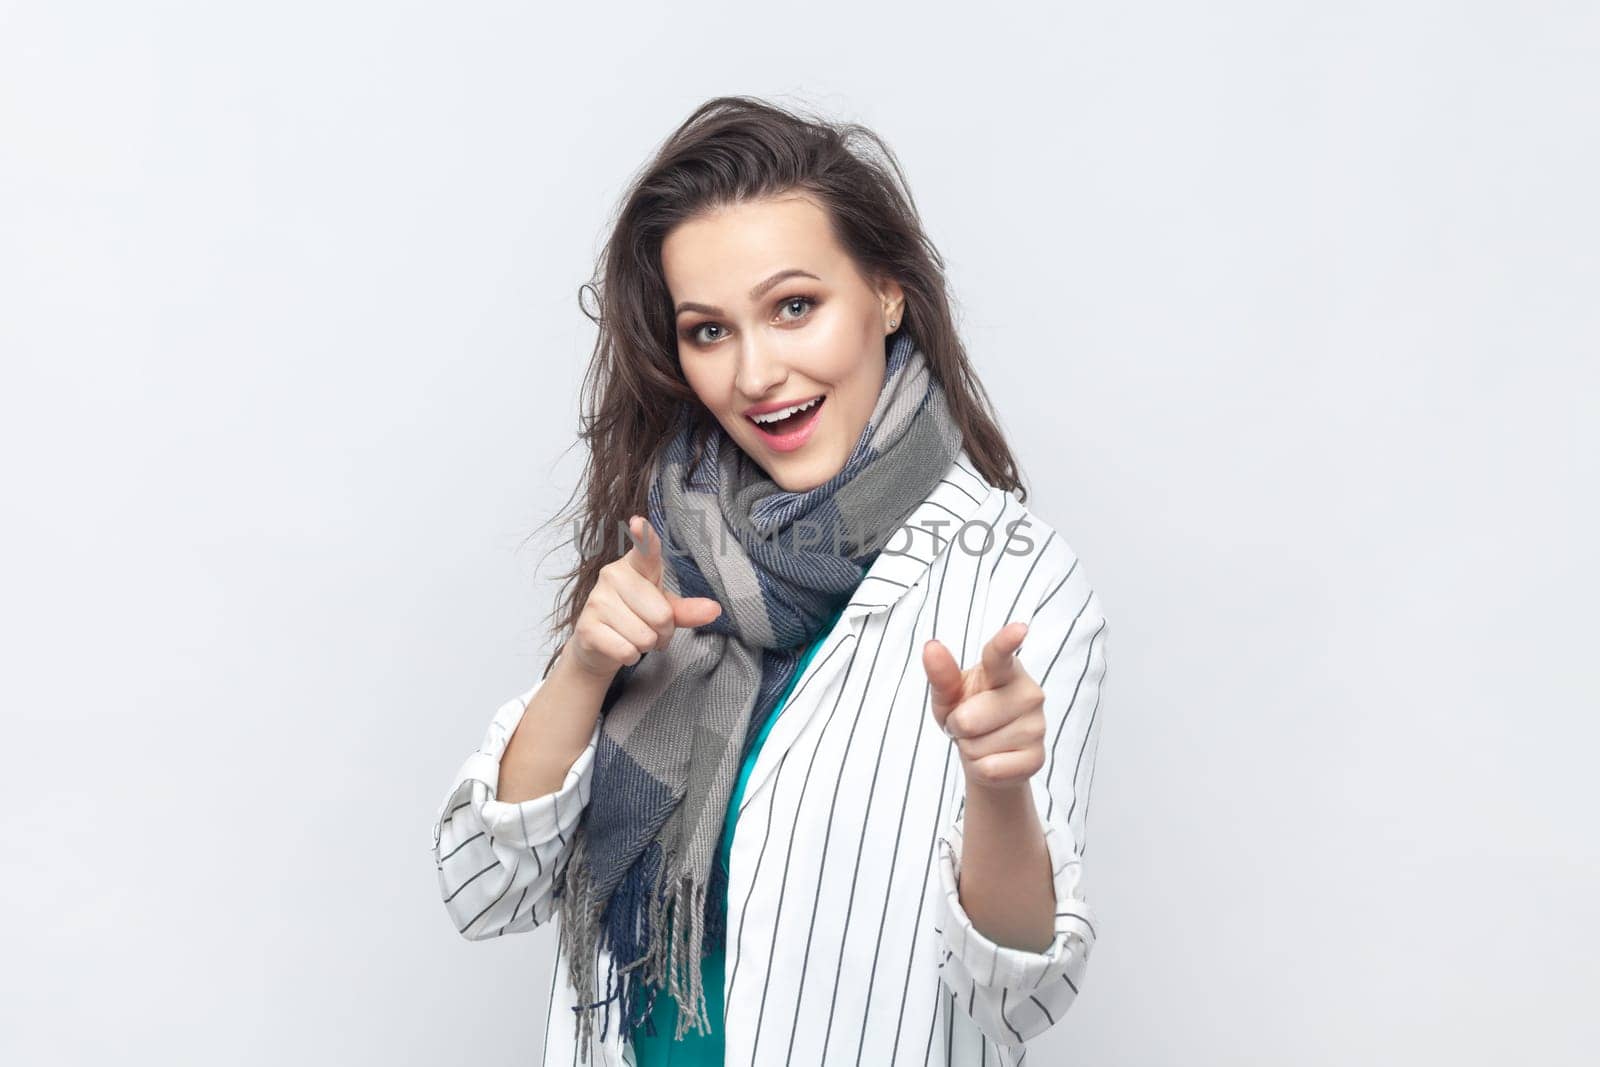 Portrait of overjoyed happy positive brunette woman pointing at camera with index fingers, choosing you, wearing striped jacket and scarf. Indoor studio shot isolated on gray background.